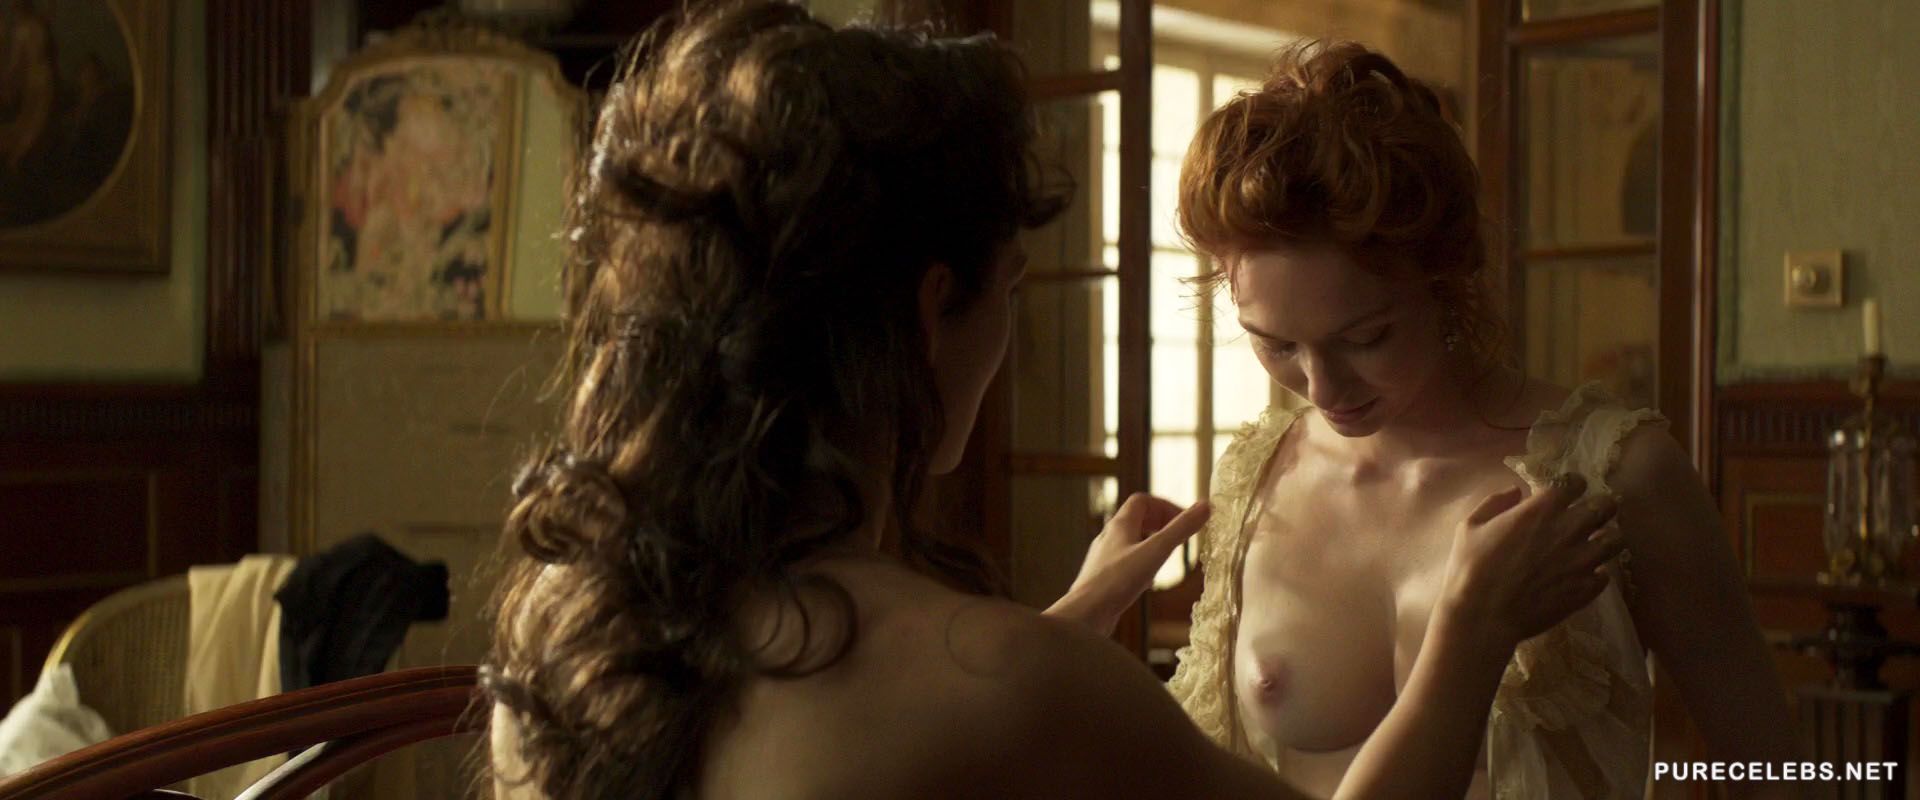 Leaked Keira Knightley & Eleanor Tomlinson Nude And Hot Lesbian Scenes ...